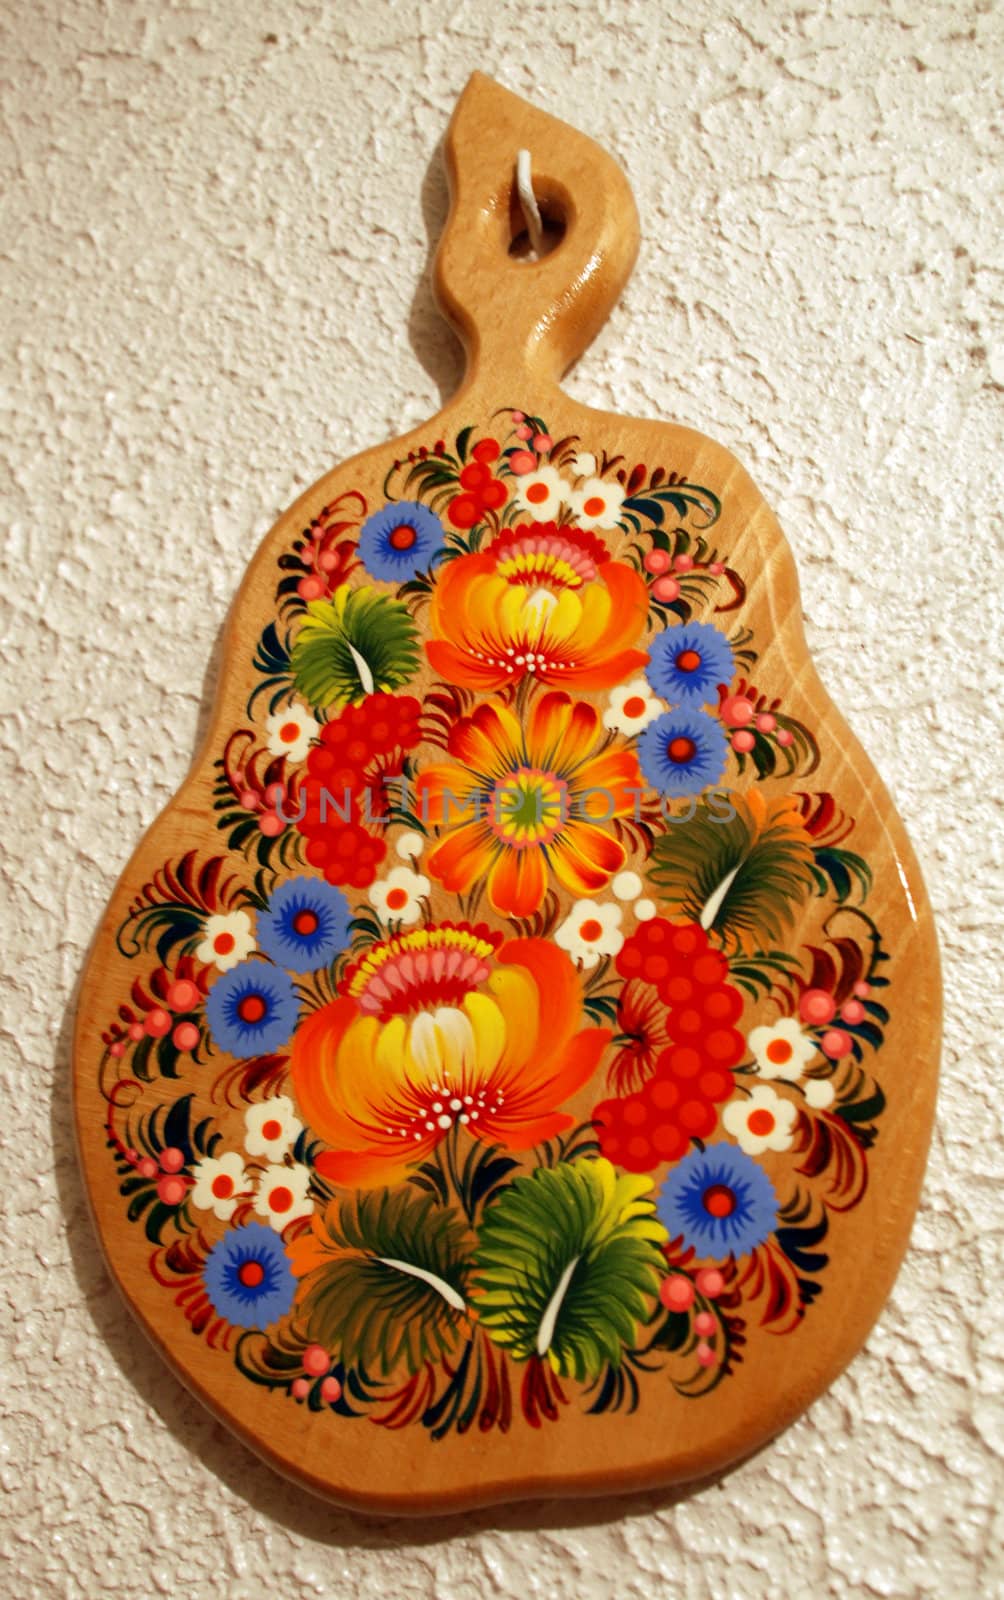 A traditionnal , decorative, cutting board, from ukraine. It's painted on a wood area.
There is a white background.